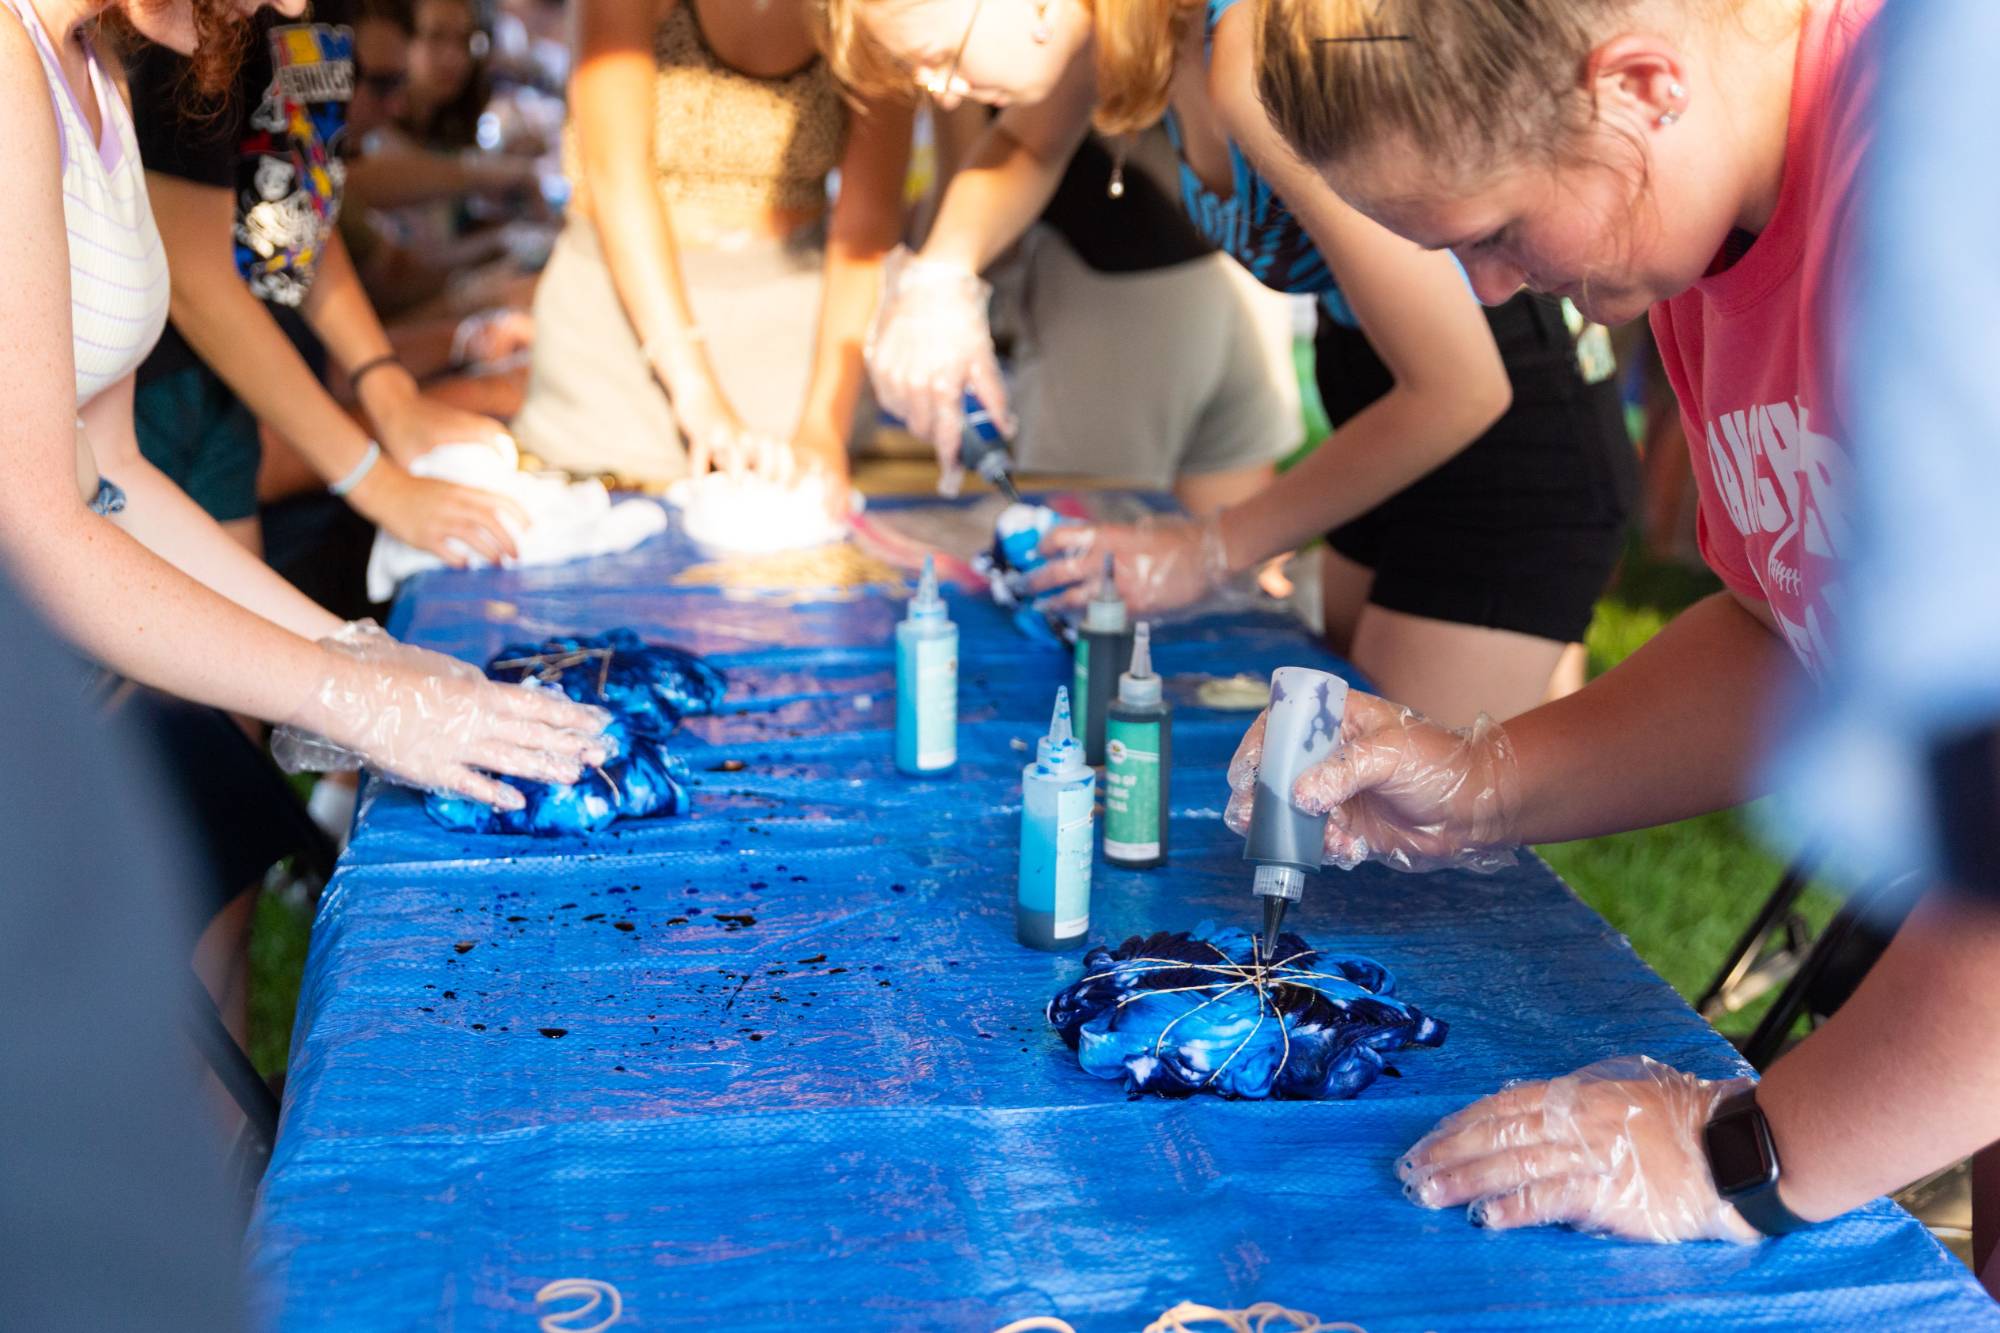 Students gather at a table outside, tie-dying t-shirts